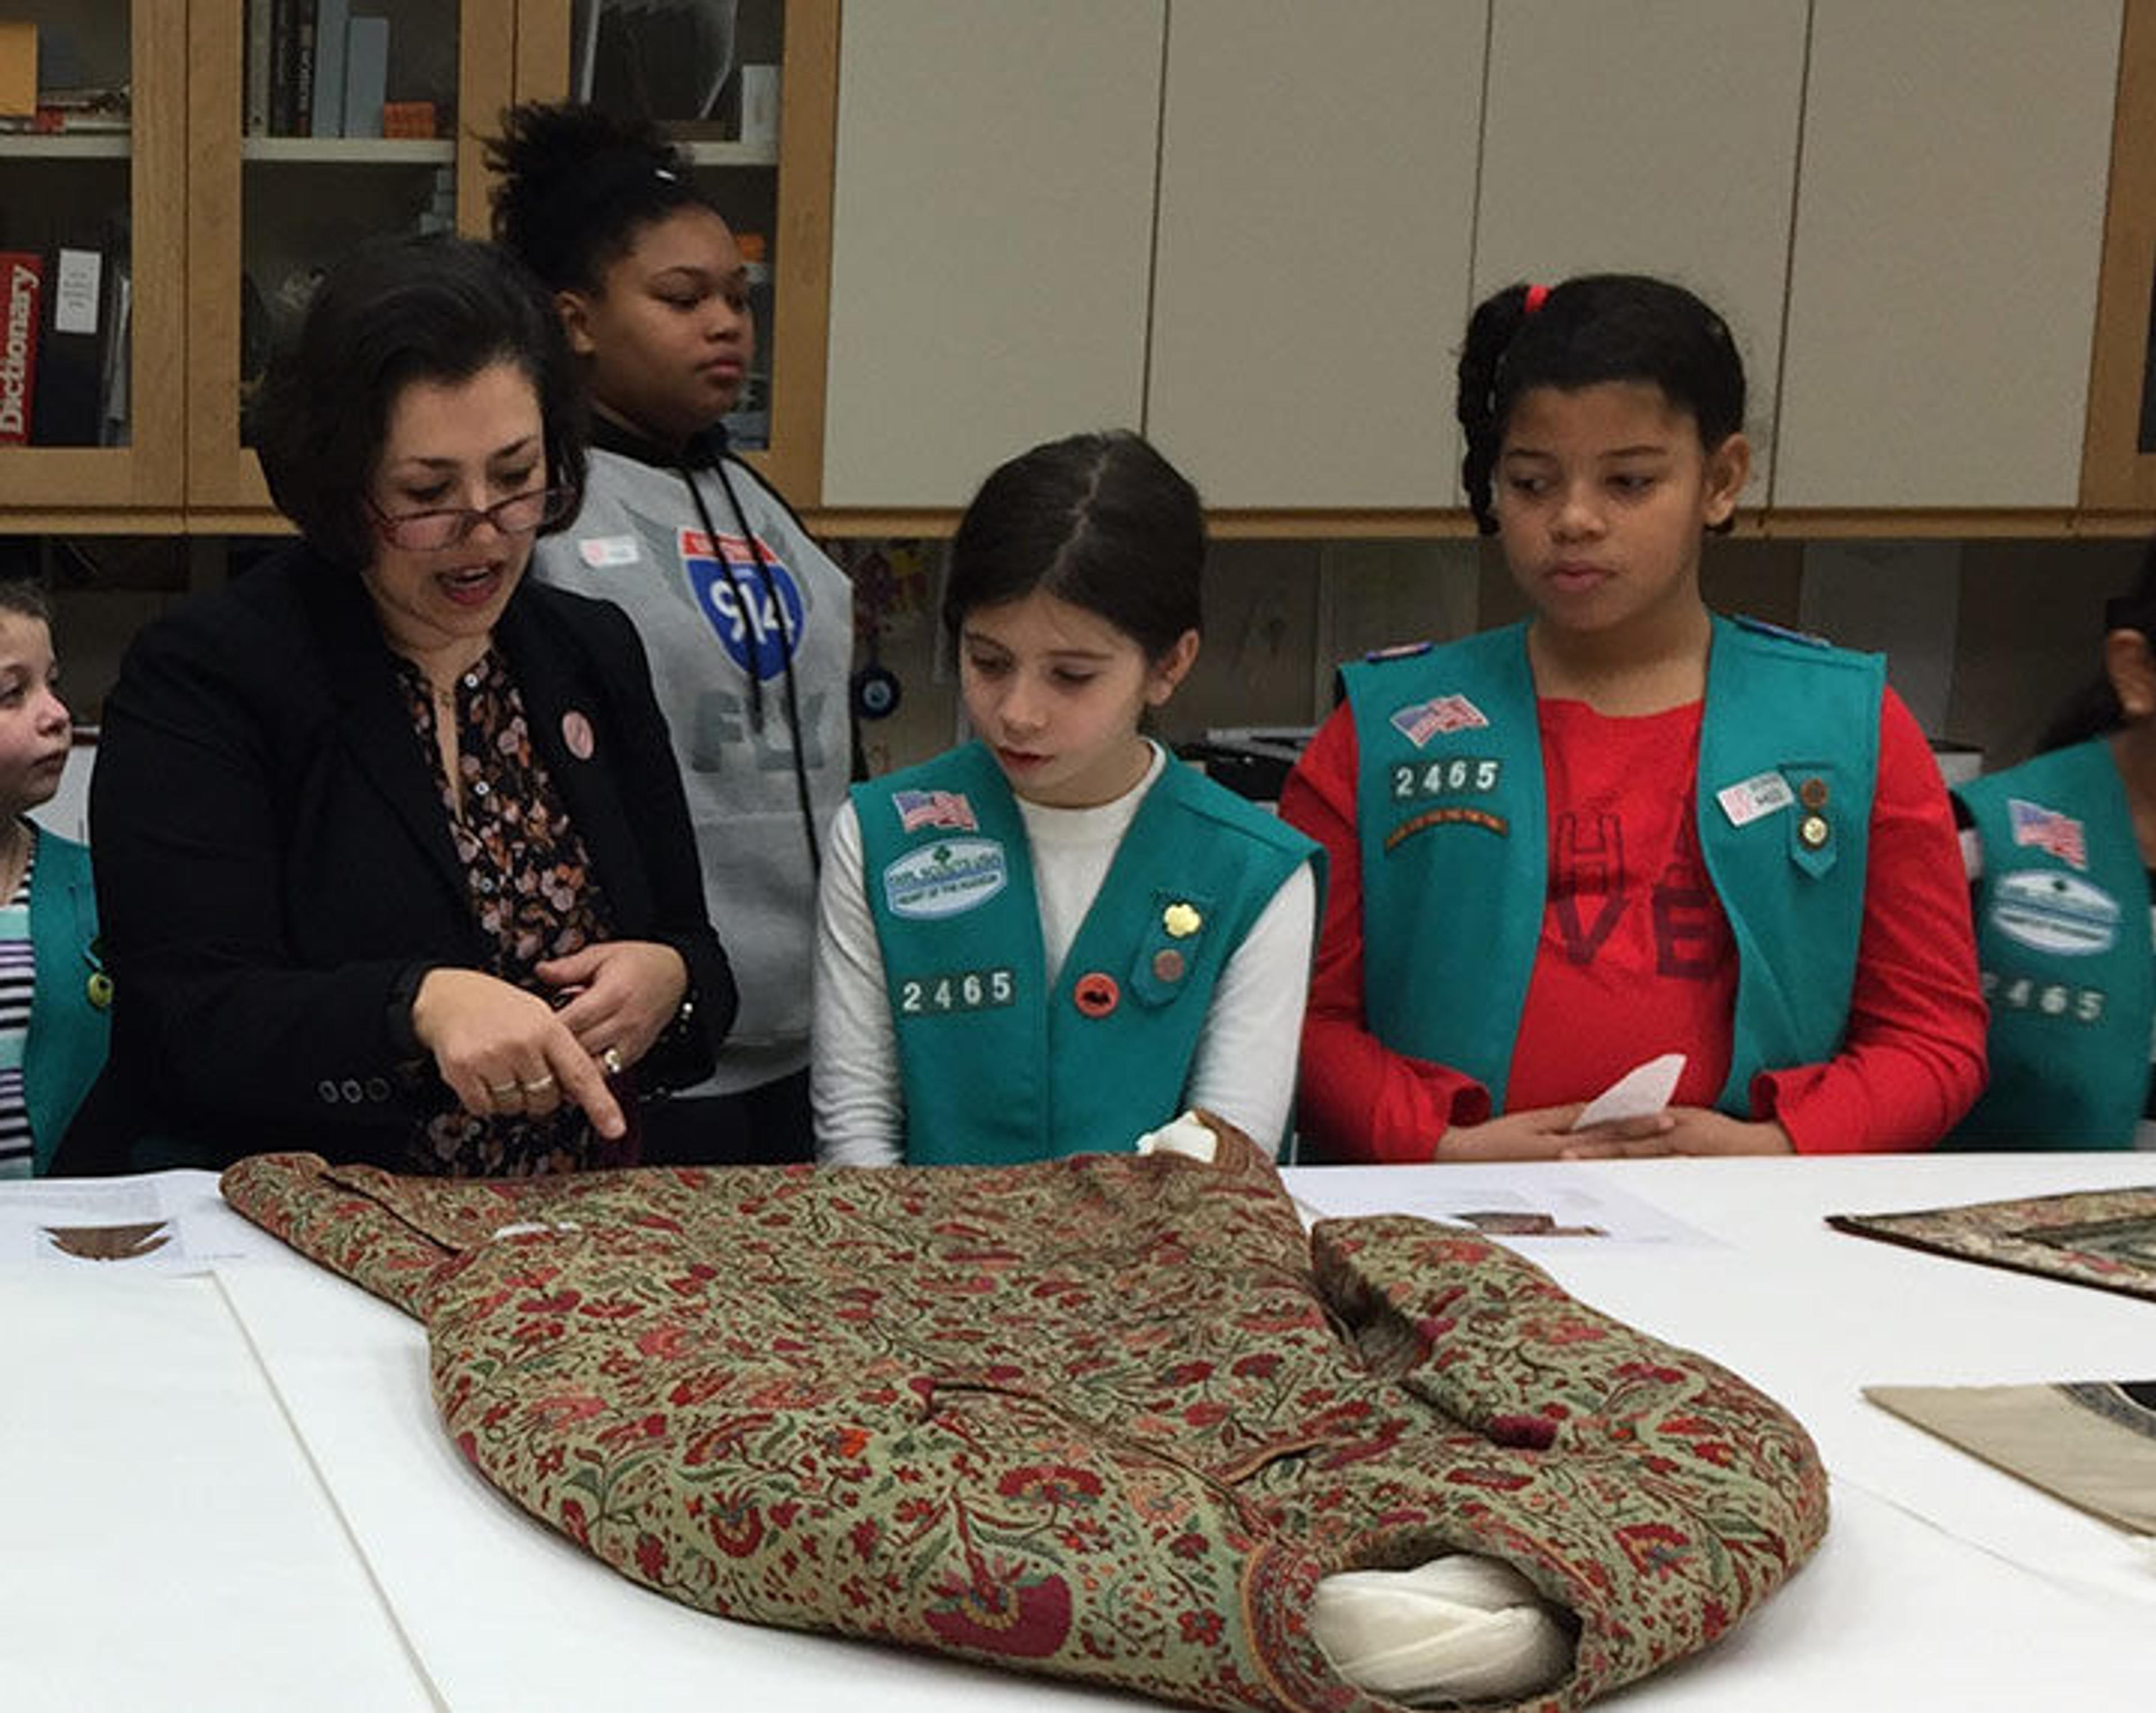 Giovanna shows the Girl Scouts an embroidered coat